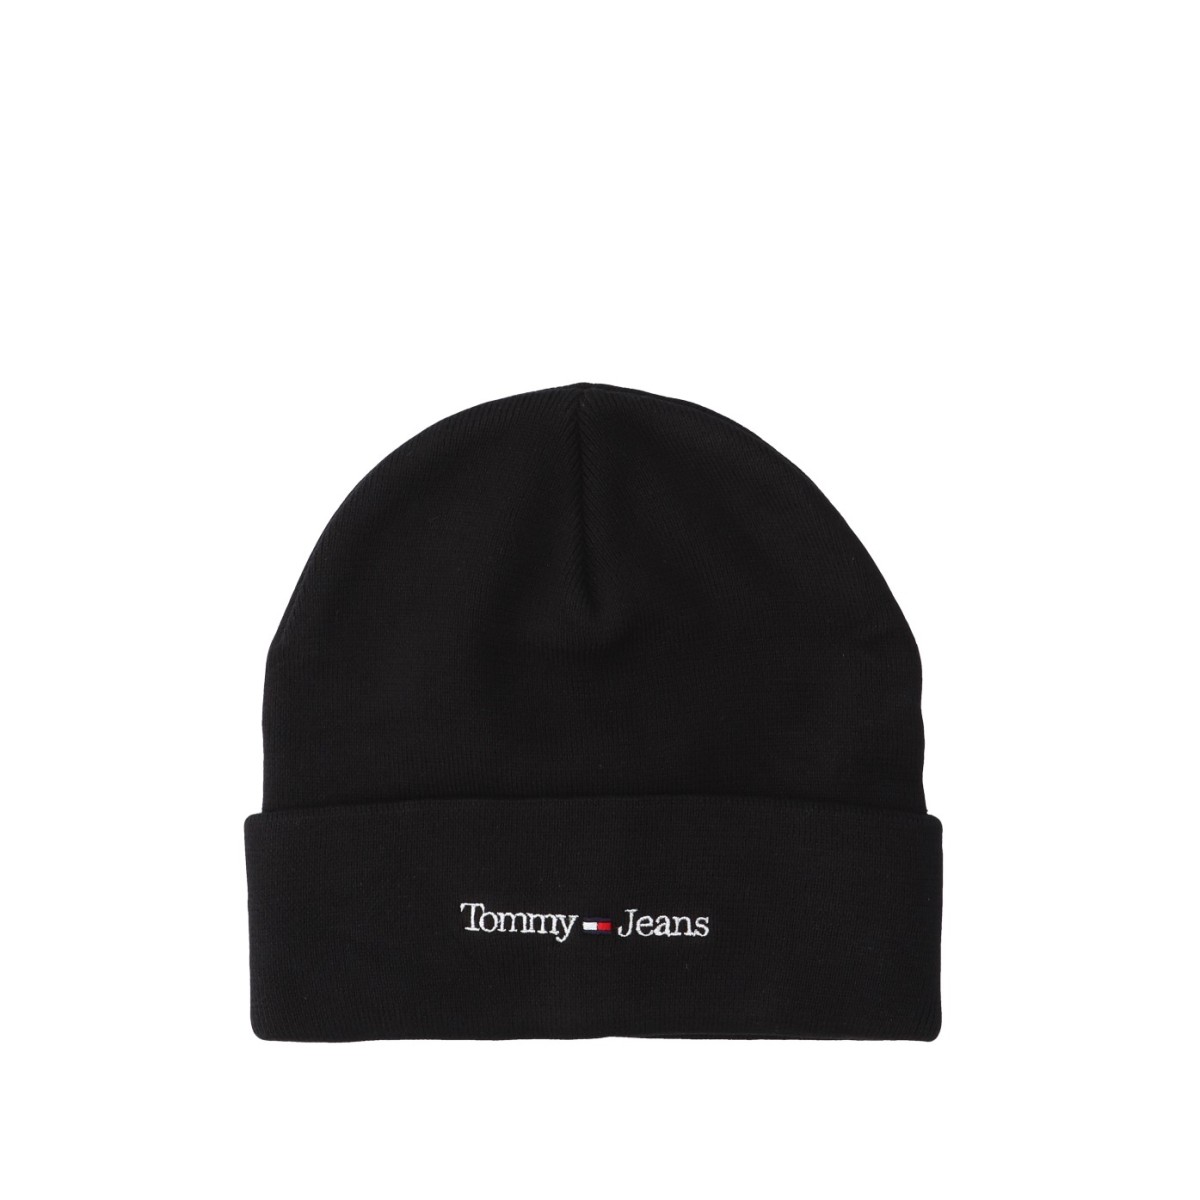 Tommy hilfiger Cappello...